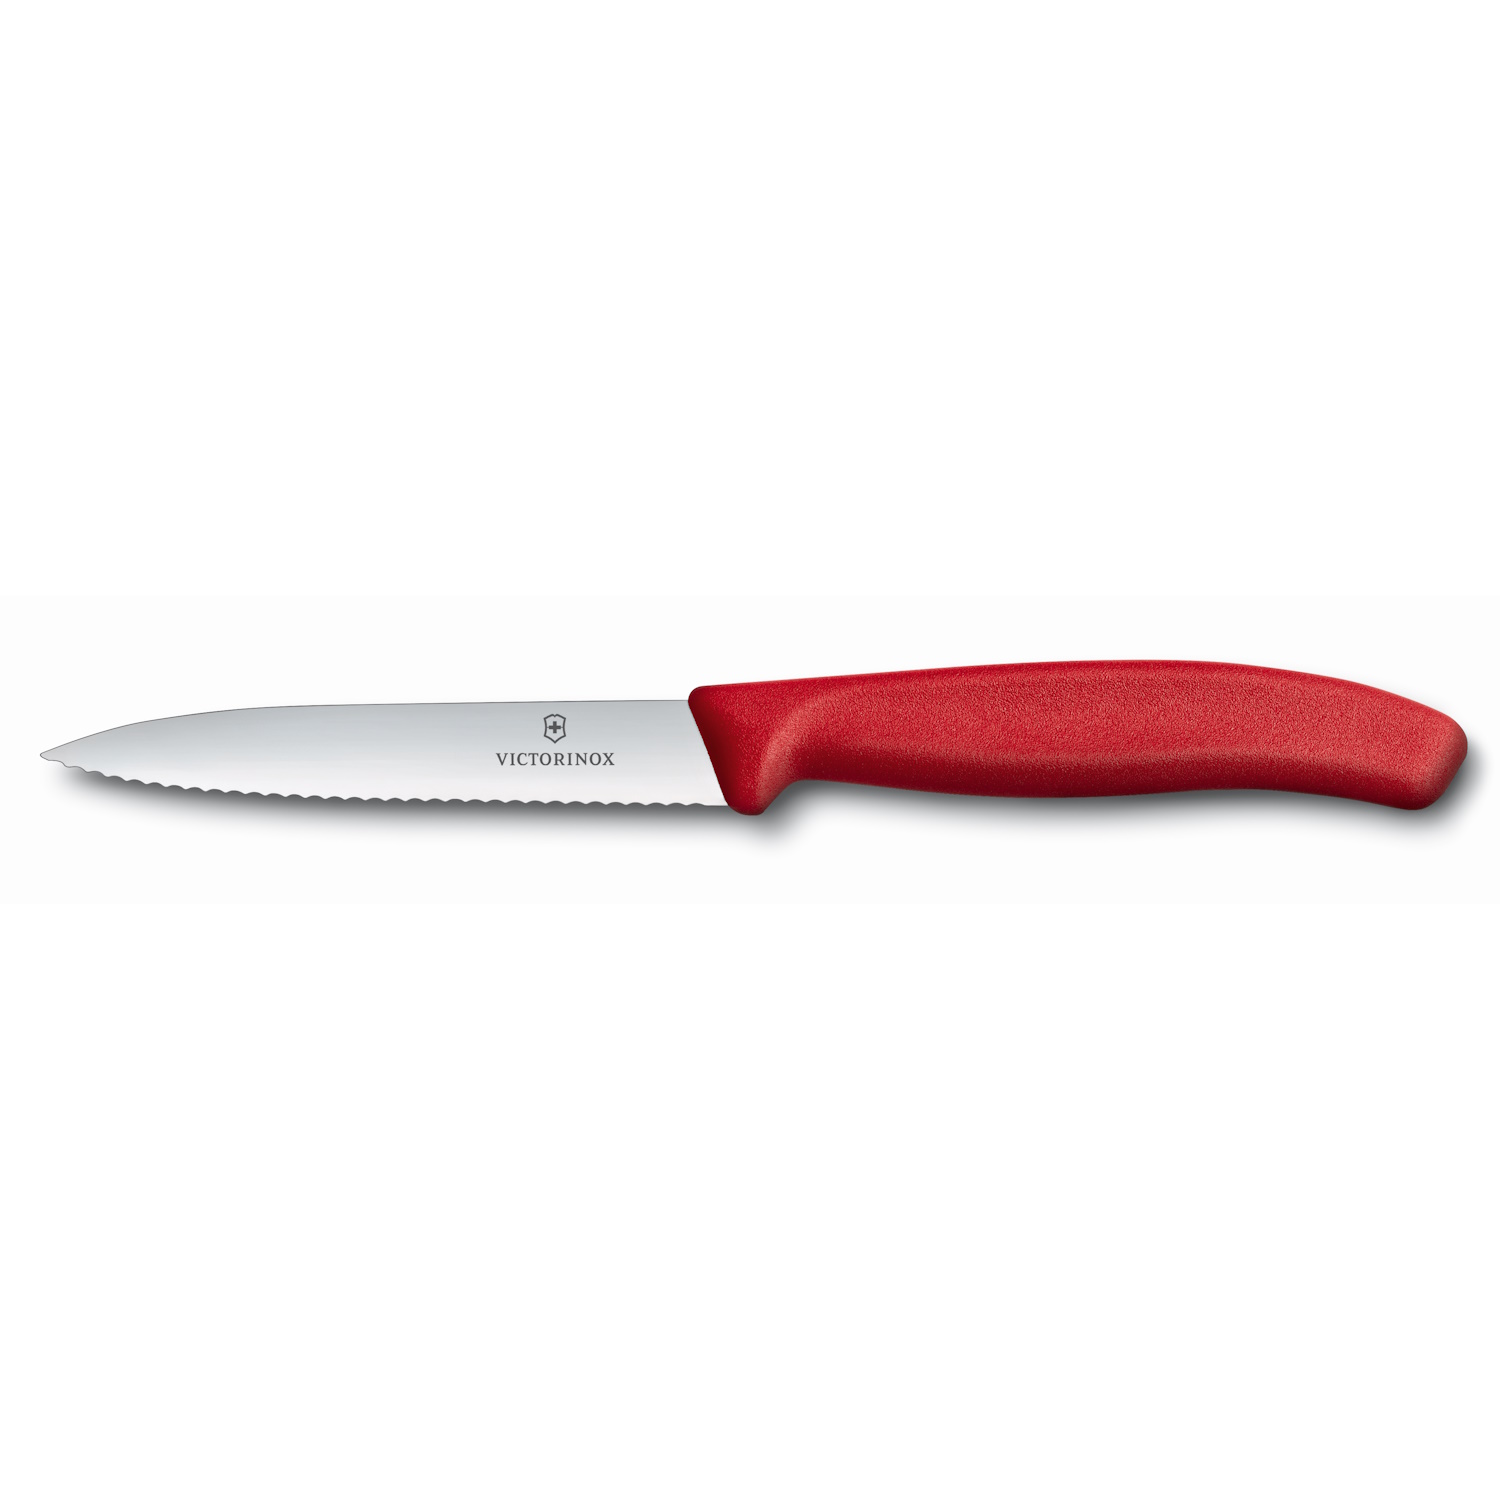 VIctorinox Paring Pointed Wavy Red Knife - 10cm